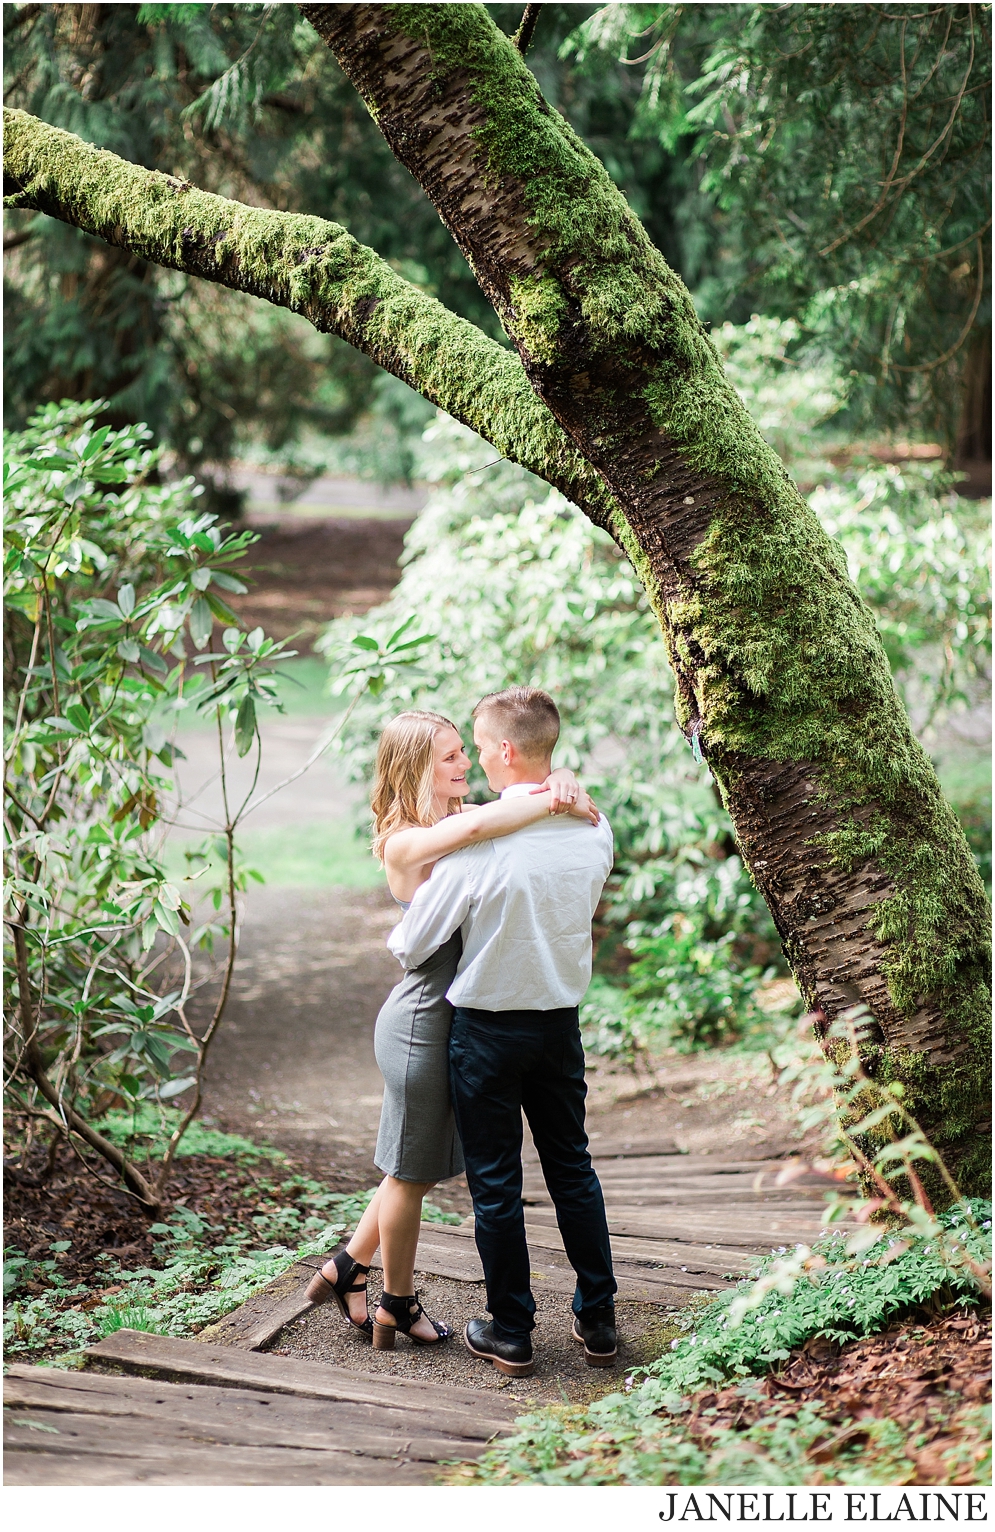 tricia and nate engagement photos-janelle elaine photography-34.jpg